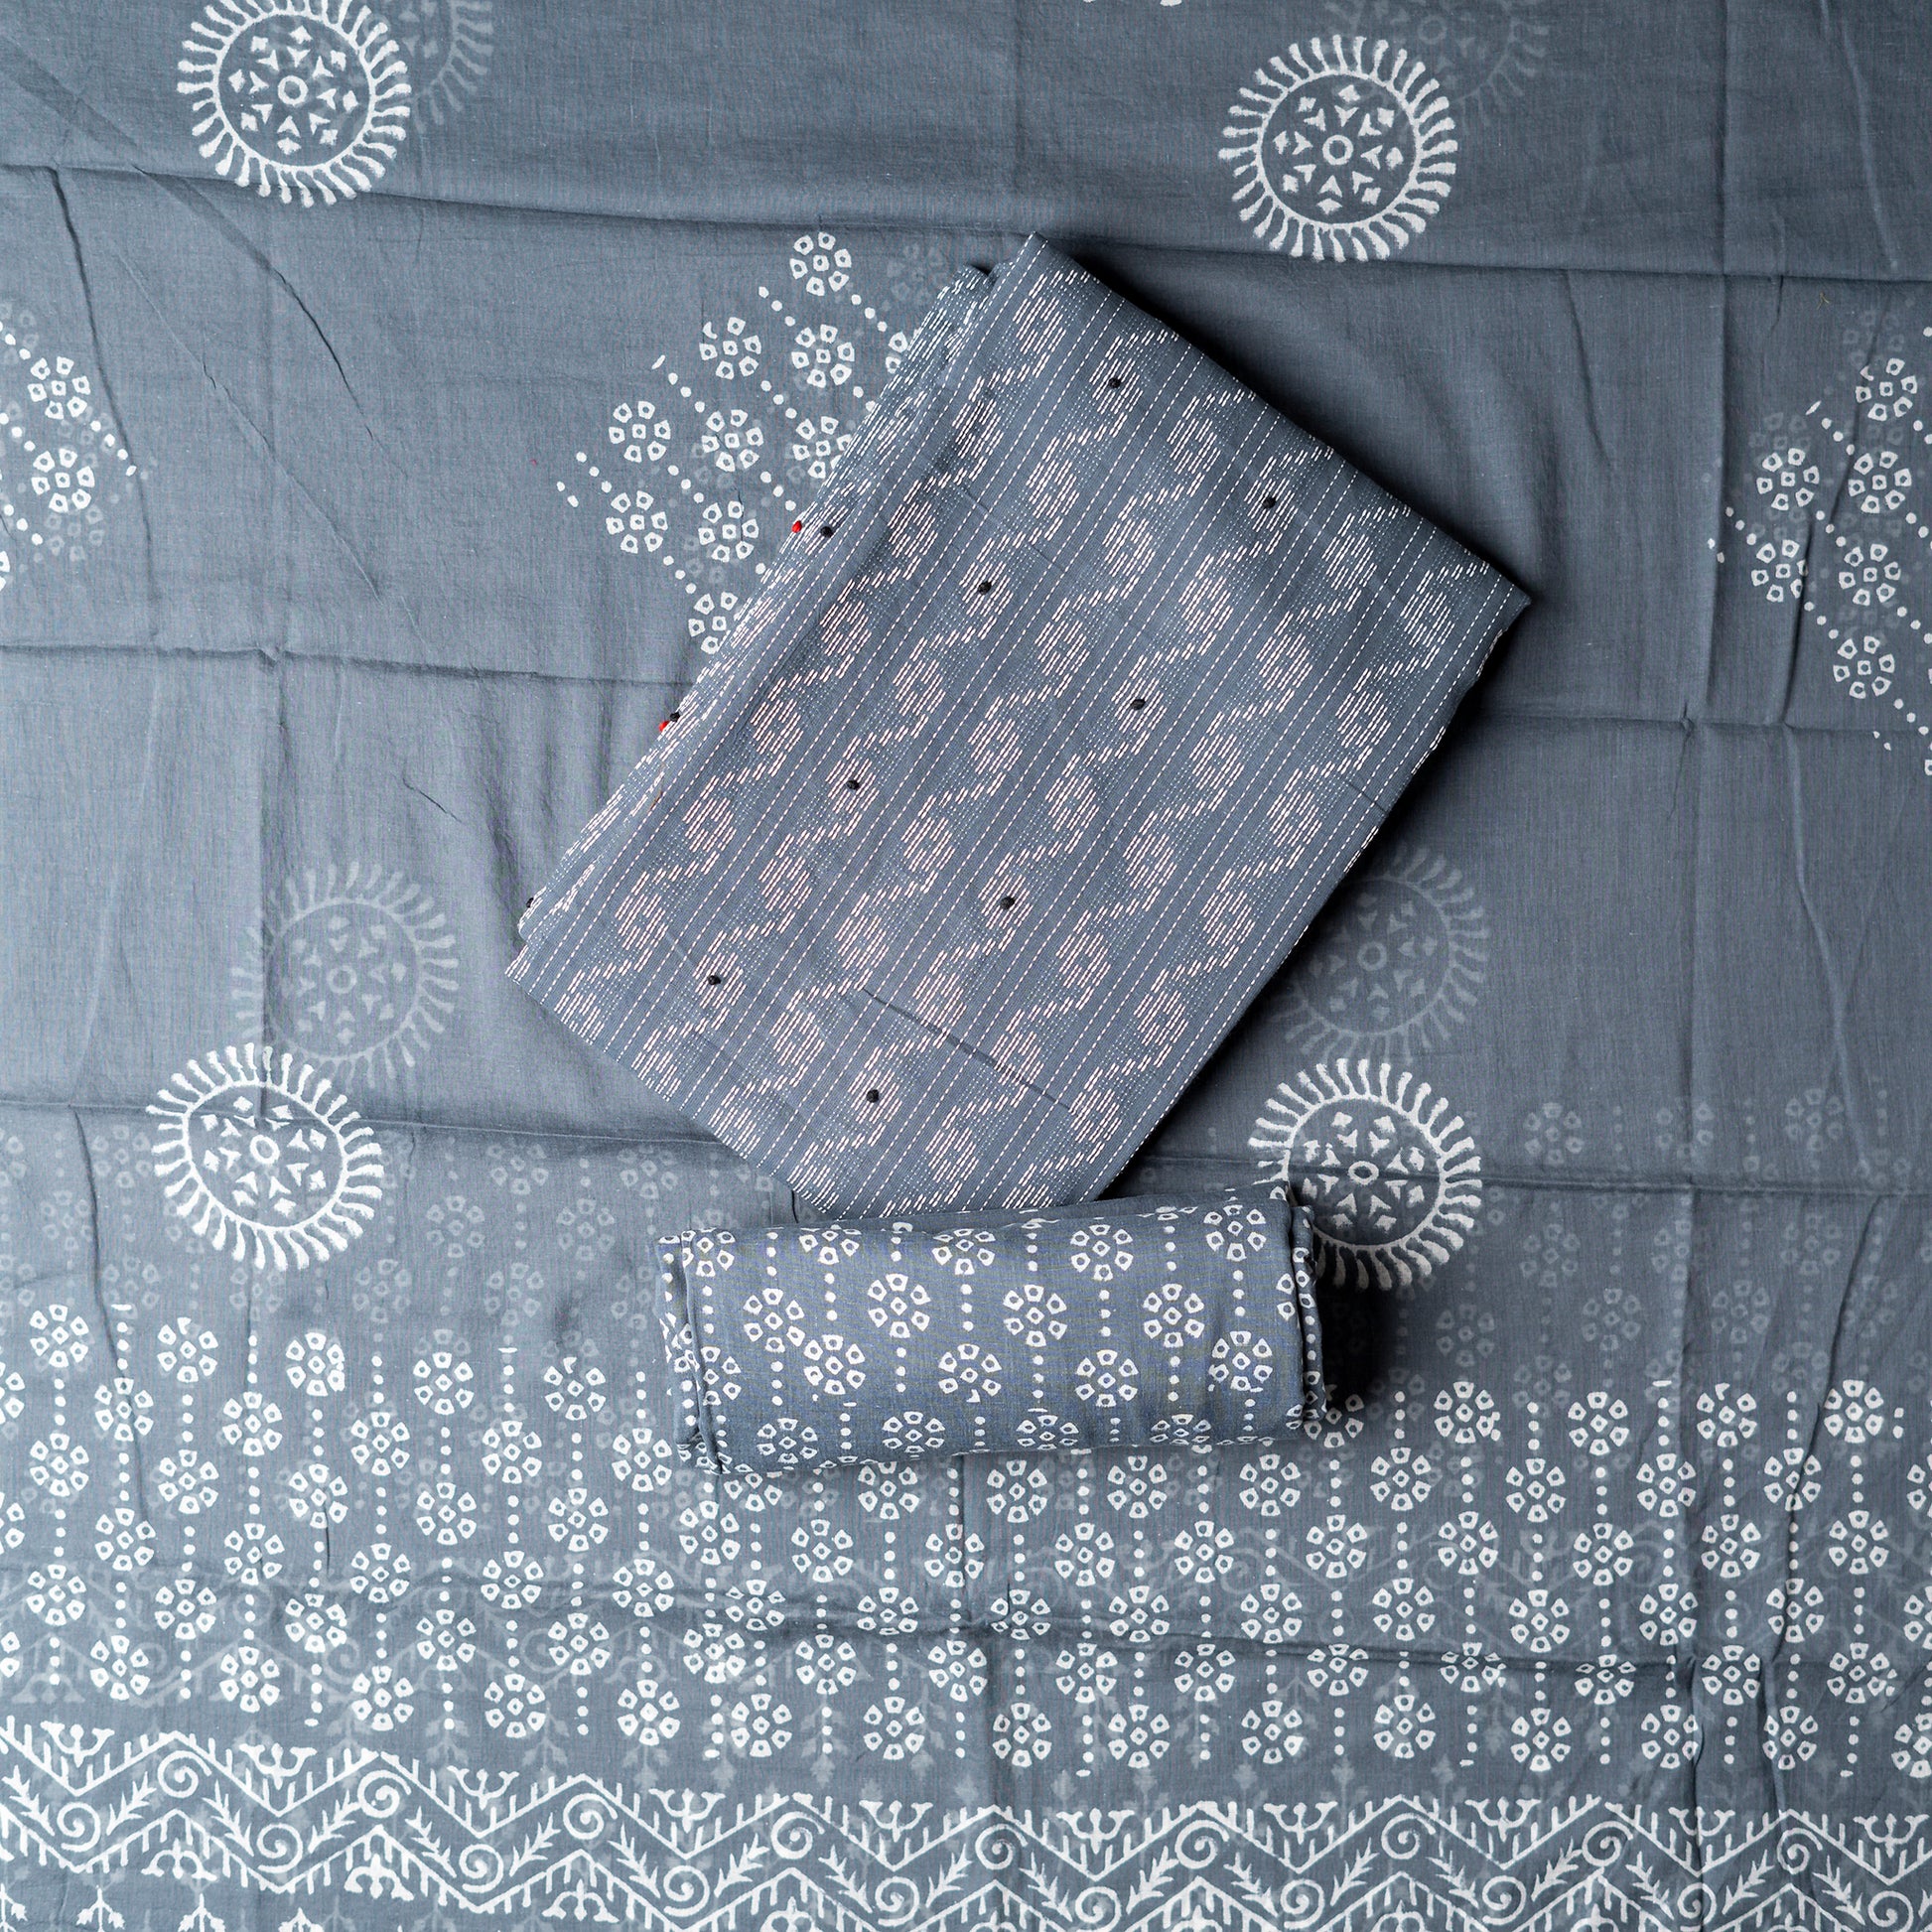 Cotton grey color top with katha work , cotton bottom with print design, mul cotton dupatta with matching print design.